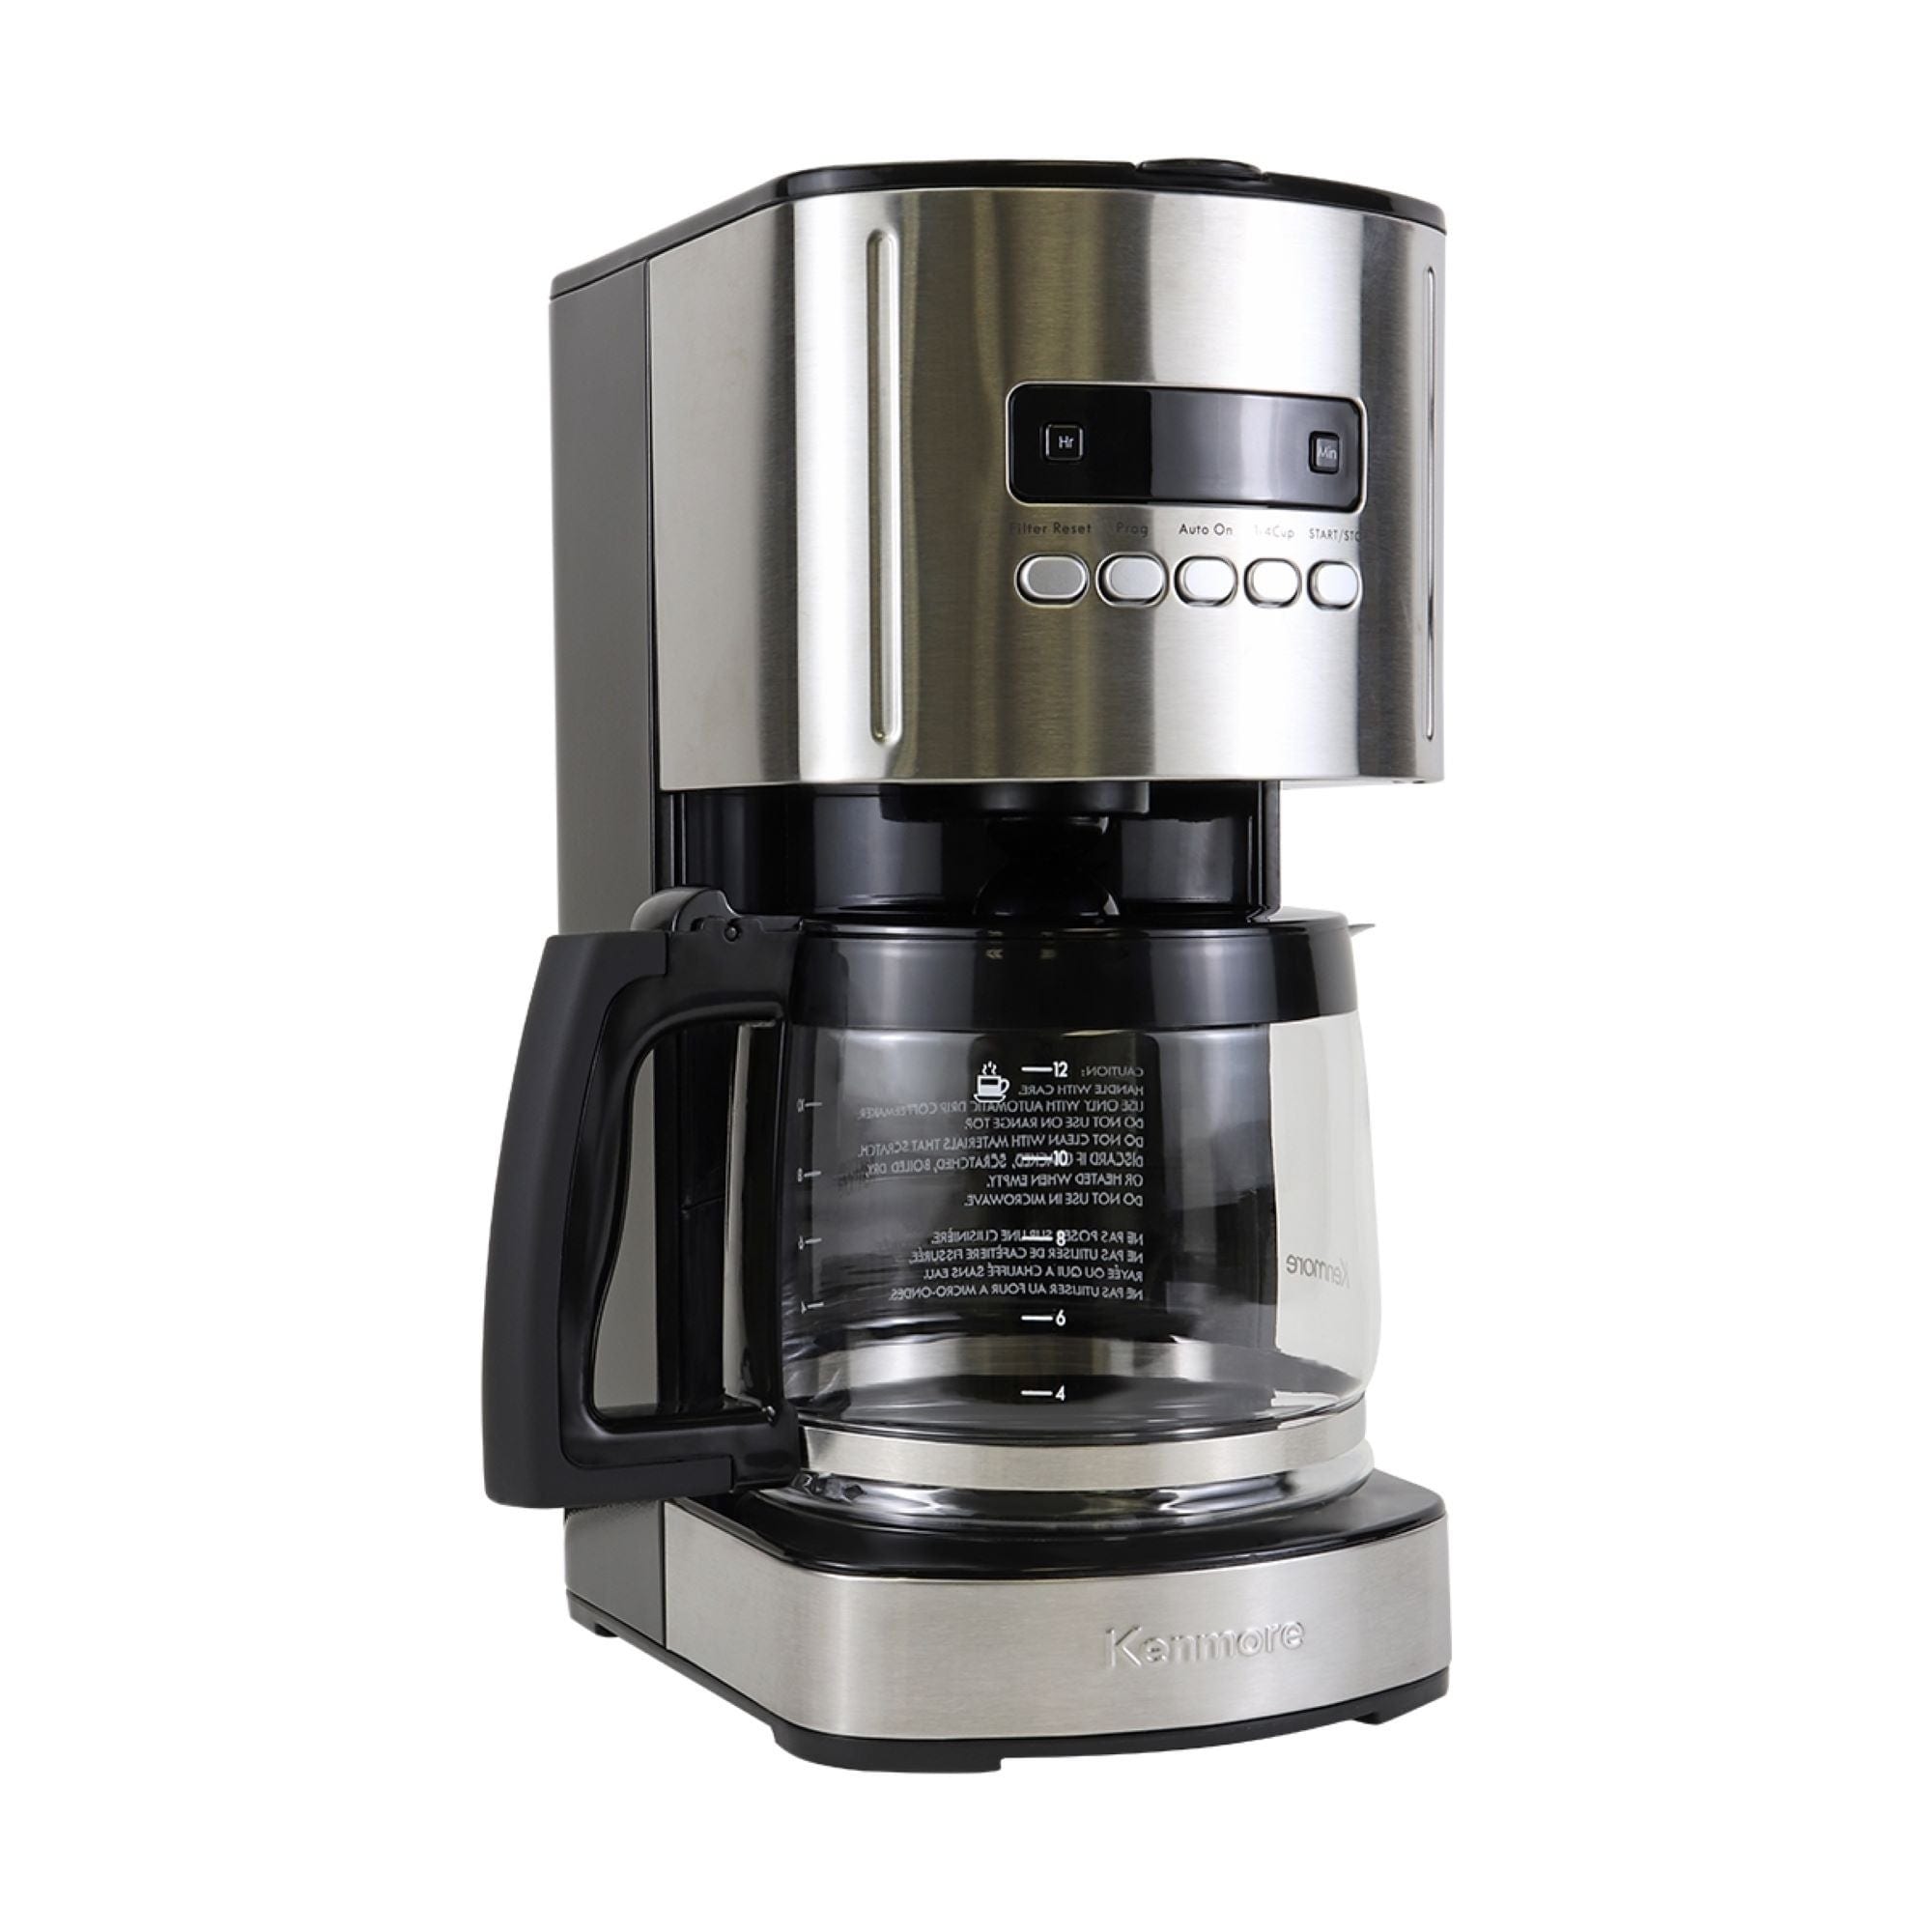 https://ak1.ostkcdn.com/images/products/is/images/direct/e293a6012539e4e7d552e389efad44dcf9593259/Kenmore-Programmable-12-cup-Coffee-Maker%2C-Black-and-Stainless-Steel.jpg